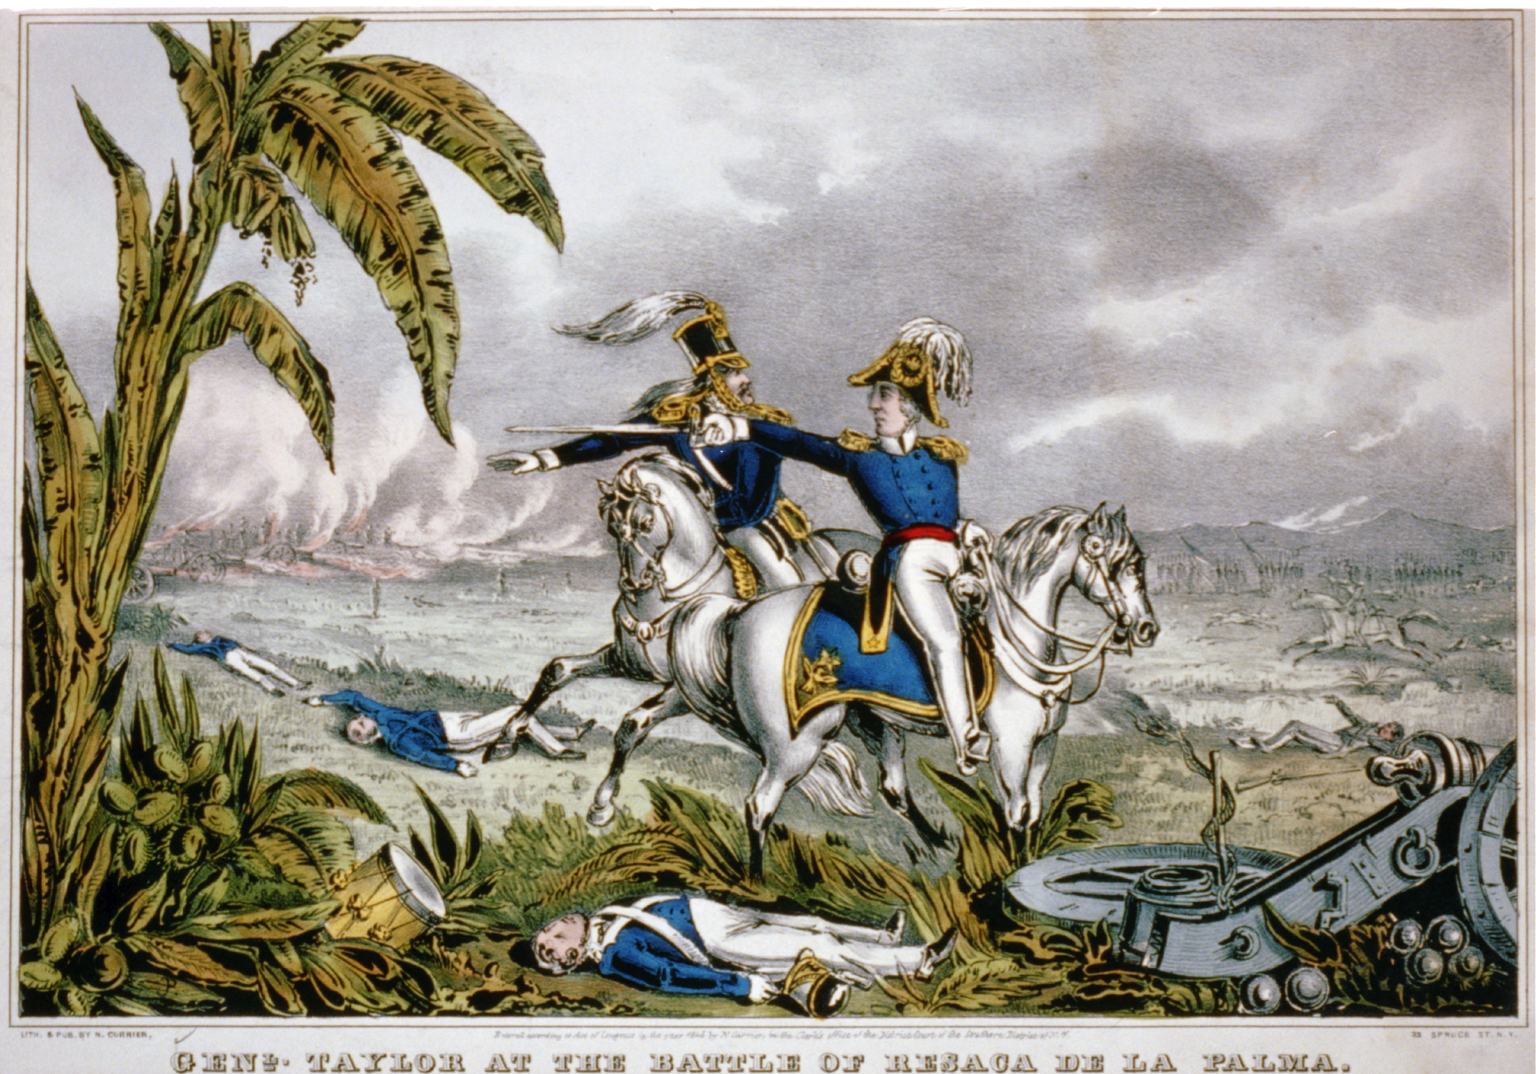 The Story About the Mexican Cession and The American-Mexican War